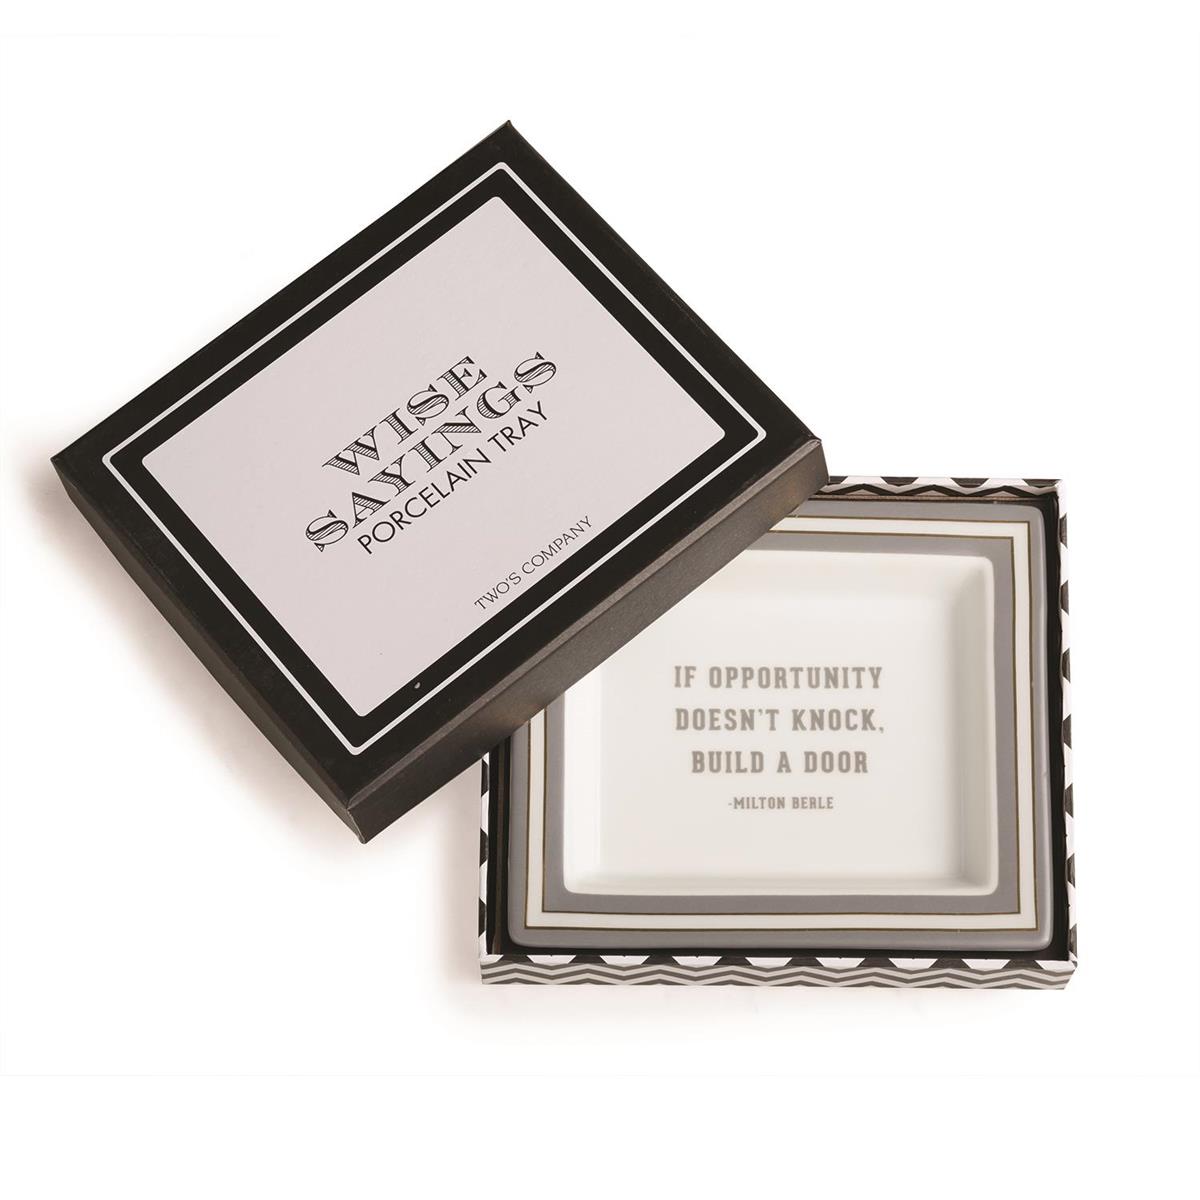 Two's Company S/6 Wise Sayings Gentleman's Desk Trays Each in Gift Box